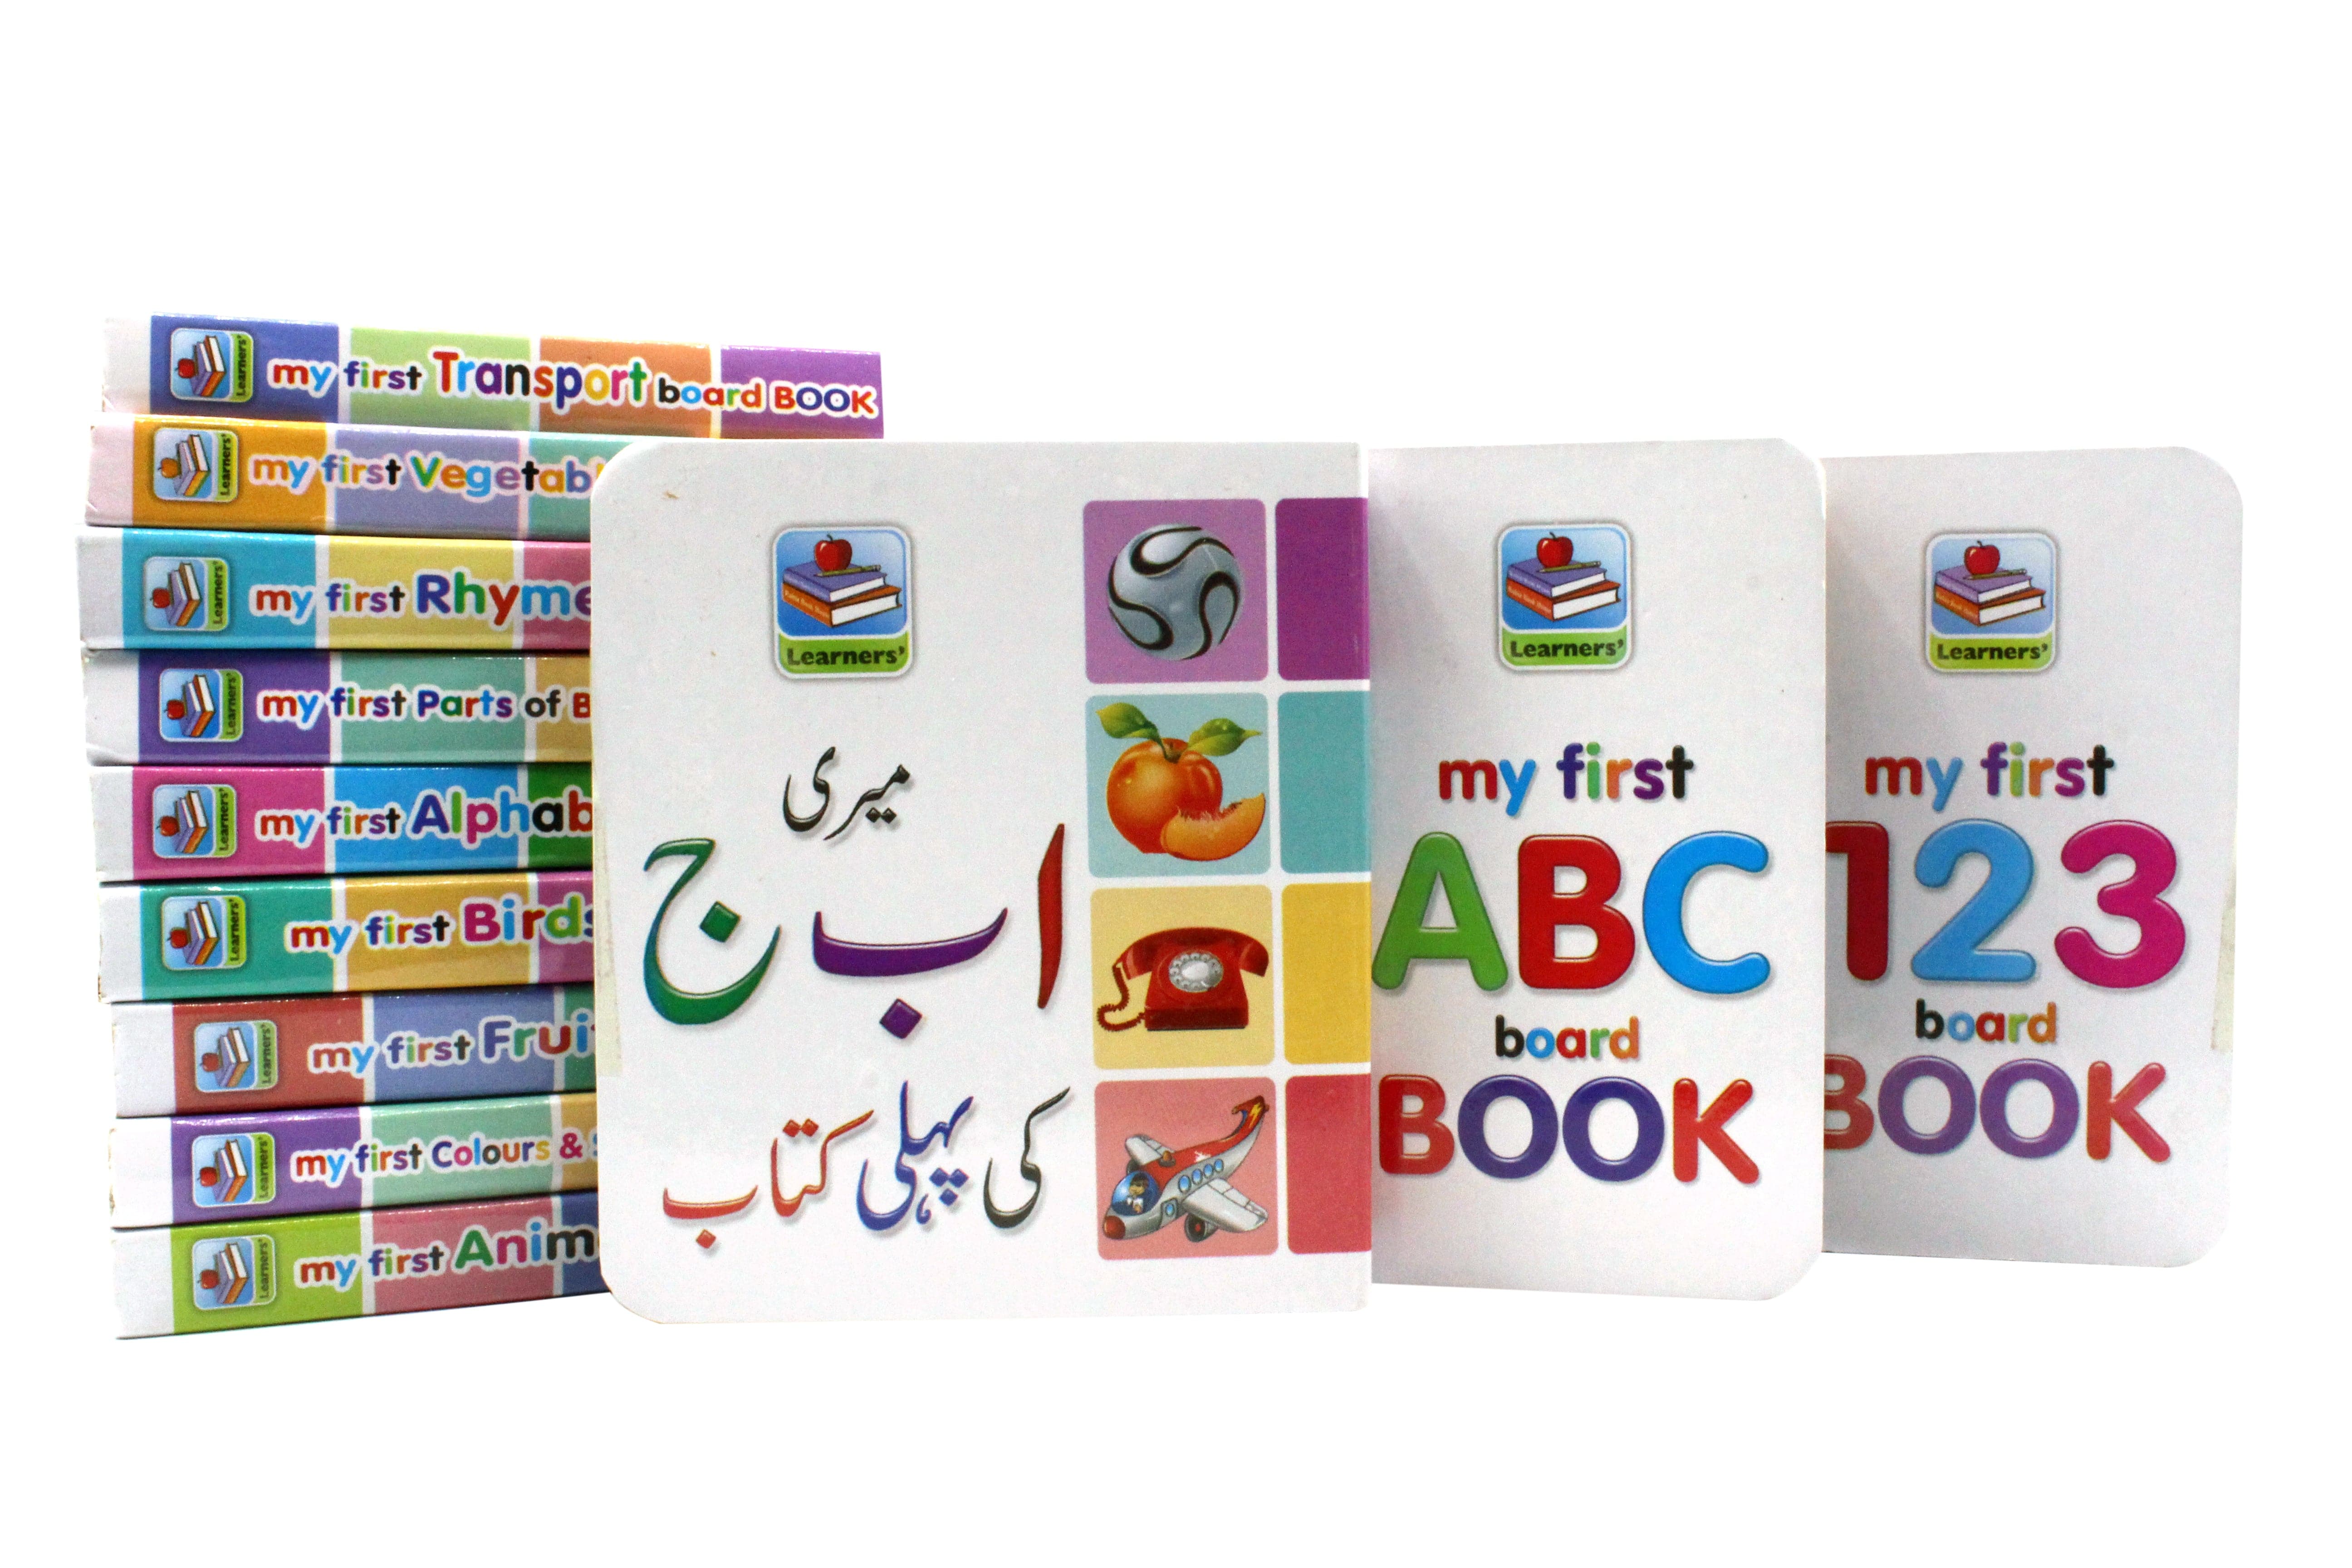 Early Learners Library Of 12 Charming & Durable Board Books